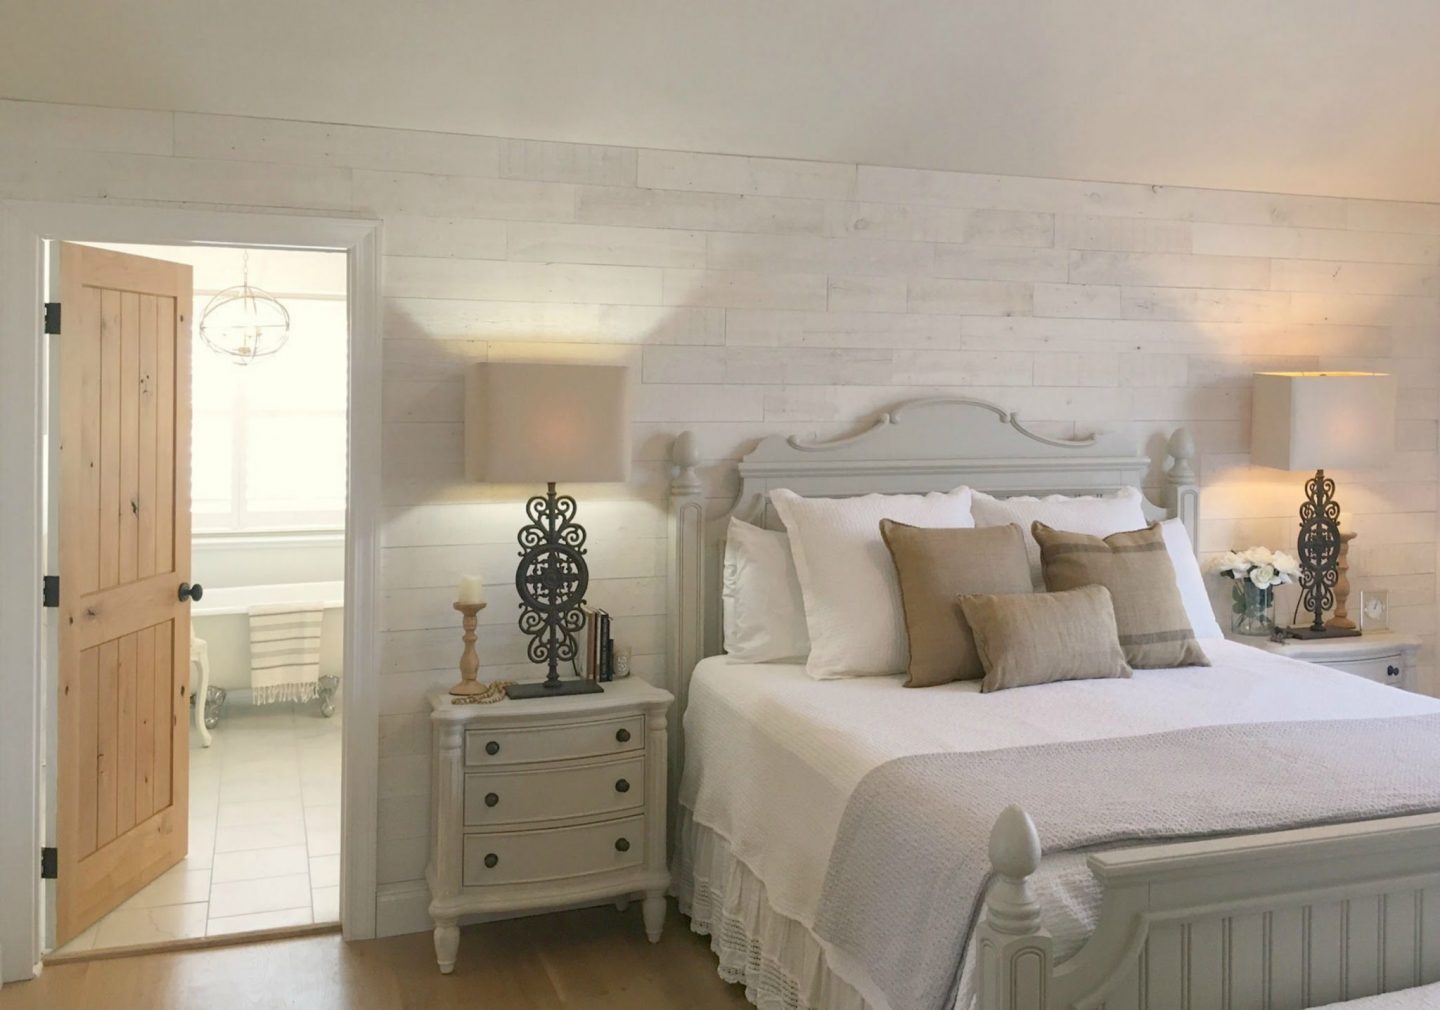 Stikwood wood planks (Hamptons) on wall of European country inspired serene bedroom. Come see more of my home in Hello Lovely House Tour in July. #hellolovelystudio #timeless #tranquil #interiordesign #europeancountry #europeanfarmhouse #simpledecor #serenedecor